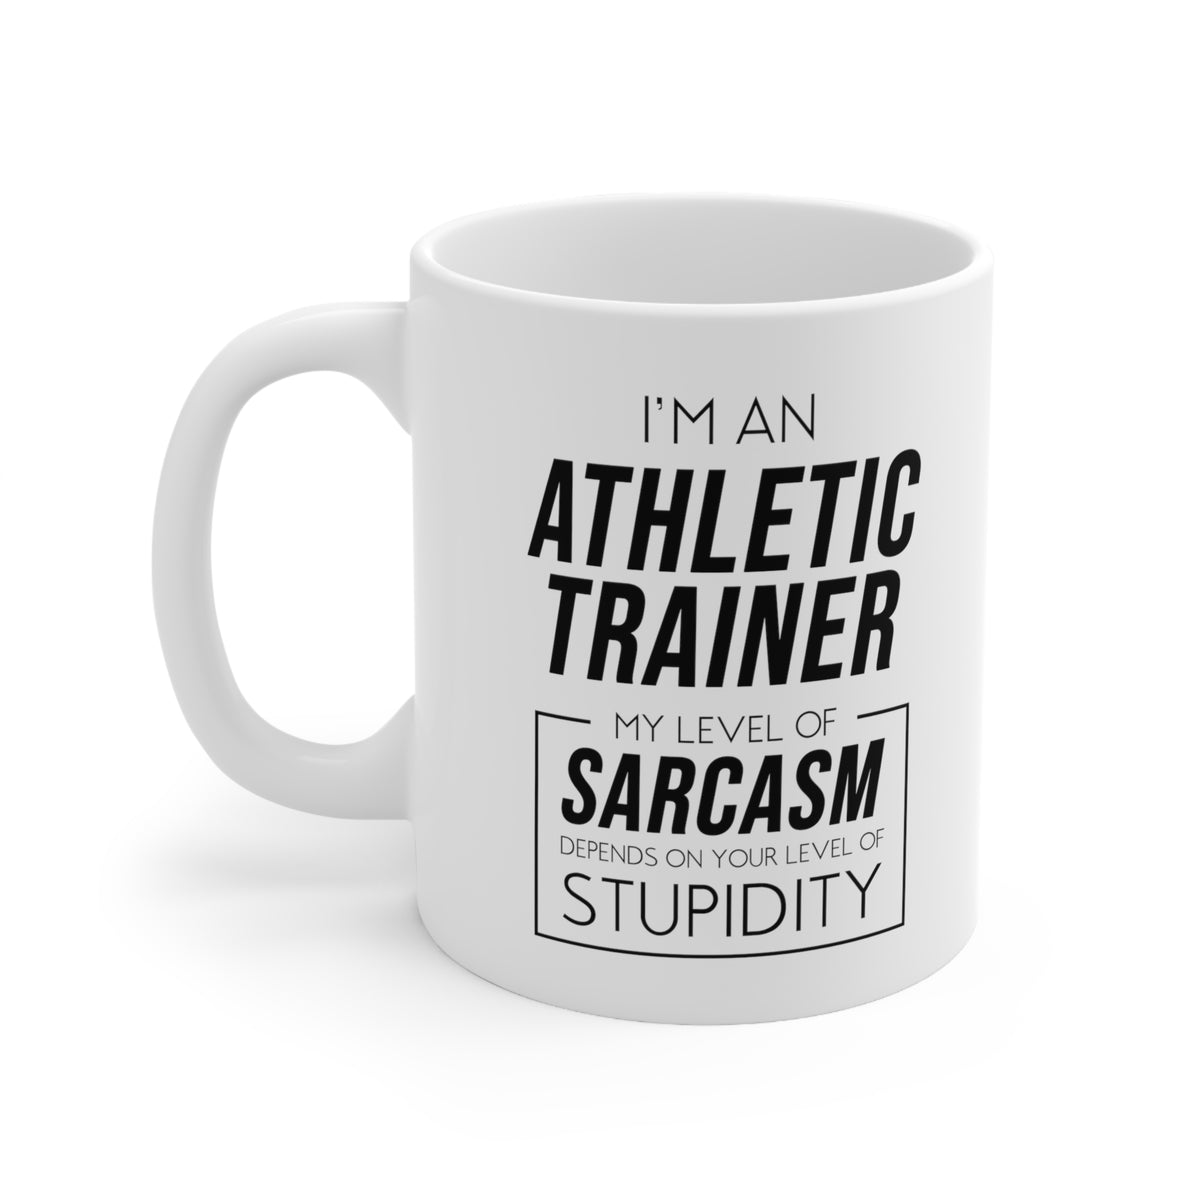 Funny Athletic Trainer Coffee Mug - My Level Of Sarcasm Cup - Unique Fitness Trainer Birthday Christmas Present for Men Women Coworker Friends